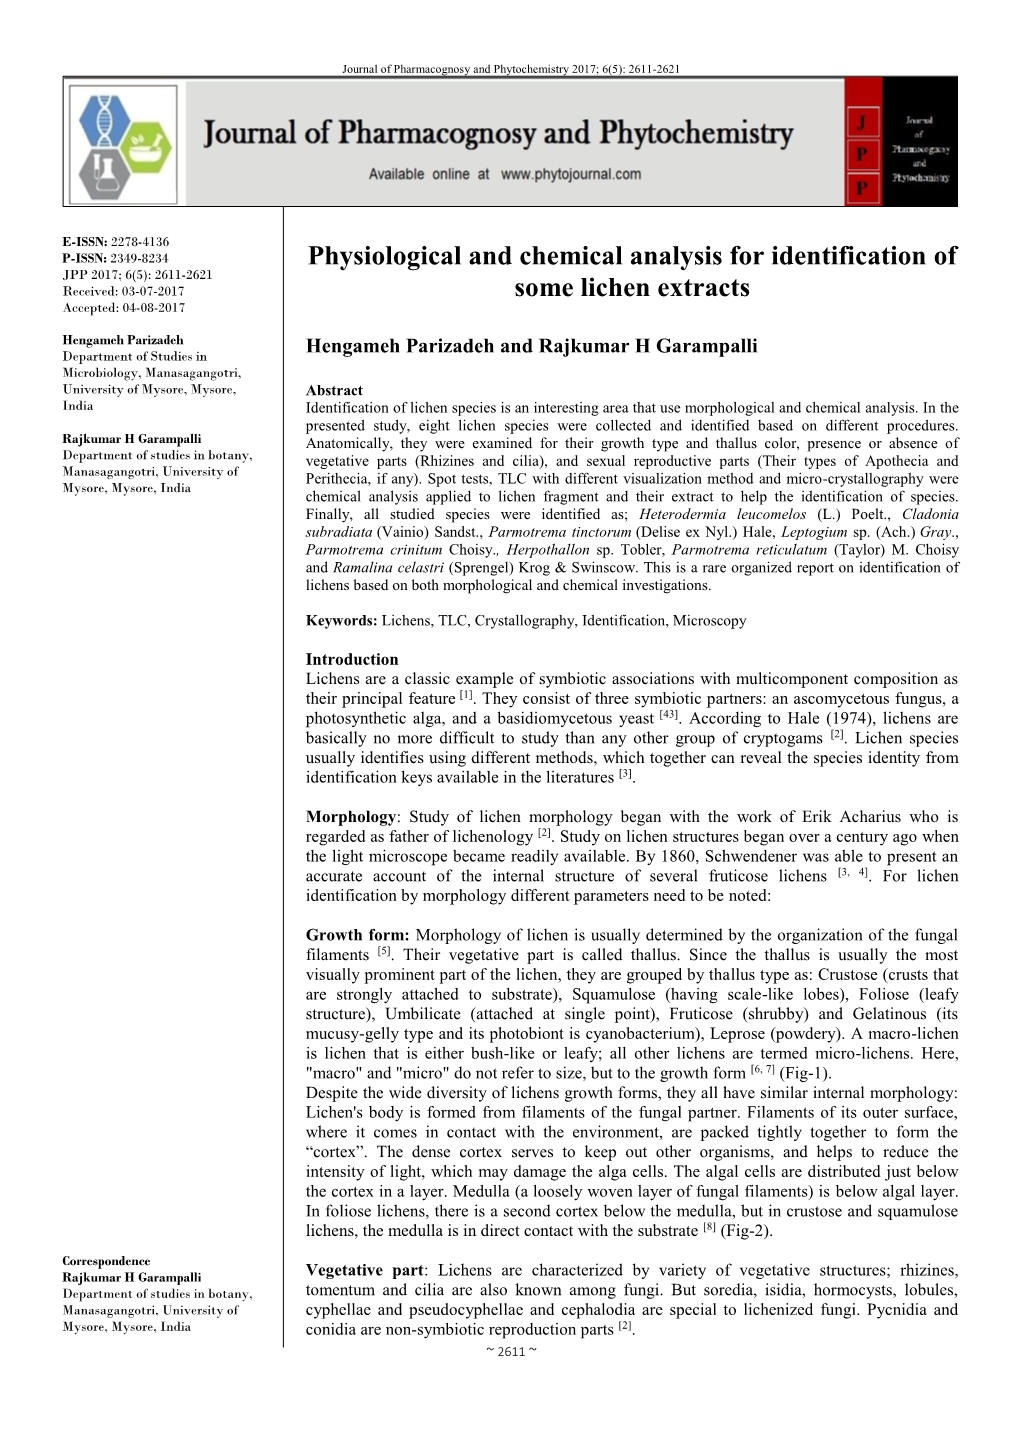 Physiological and Chemical Analysis for Identification of Some Lichen